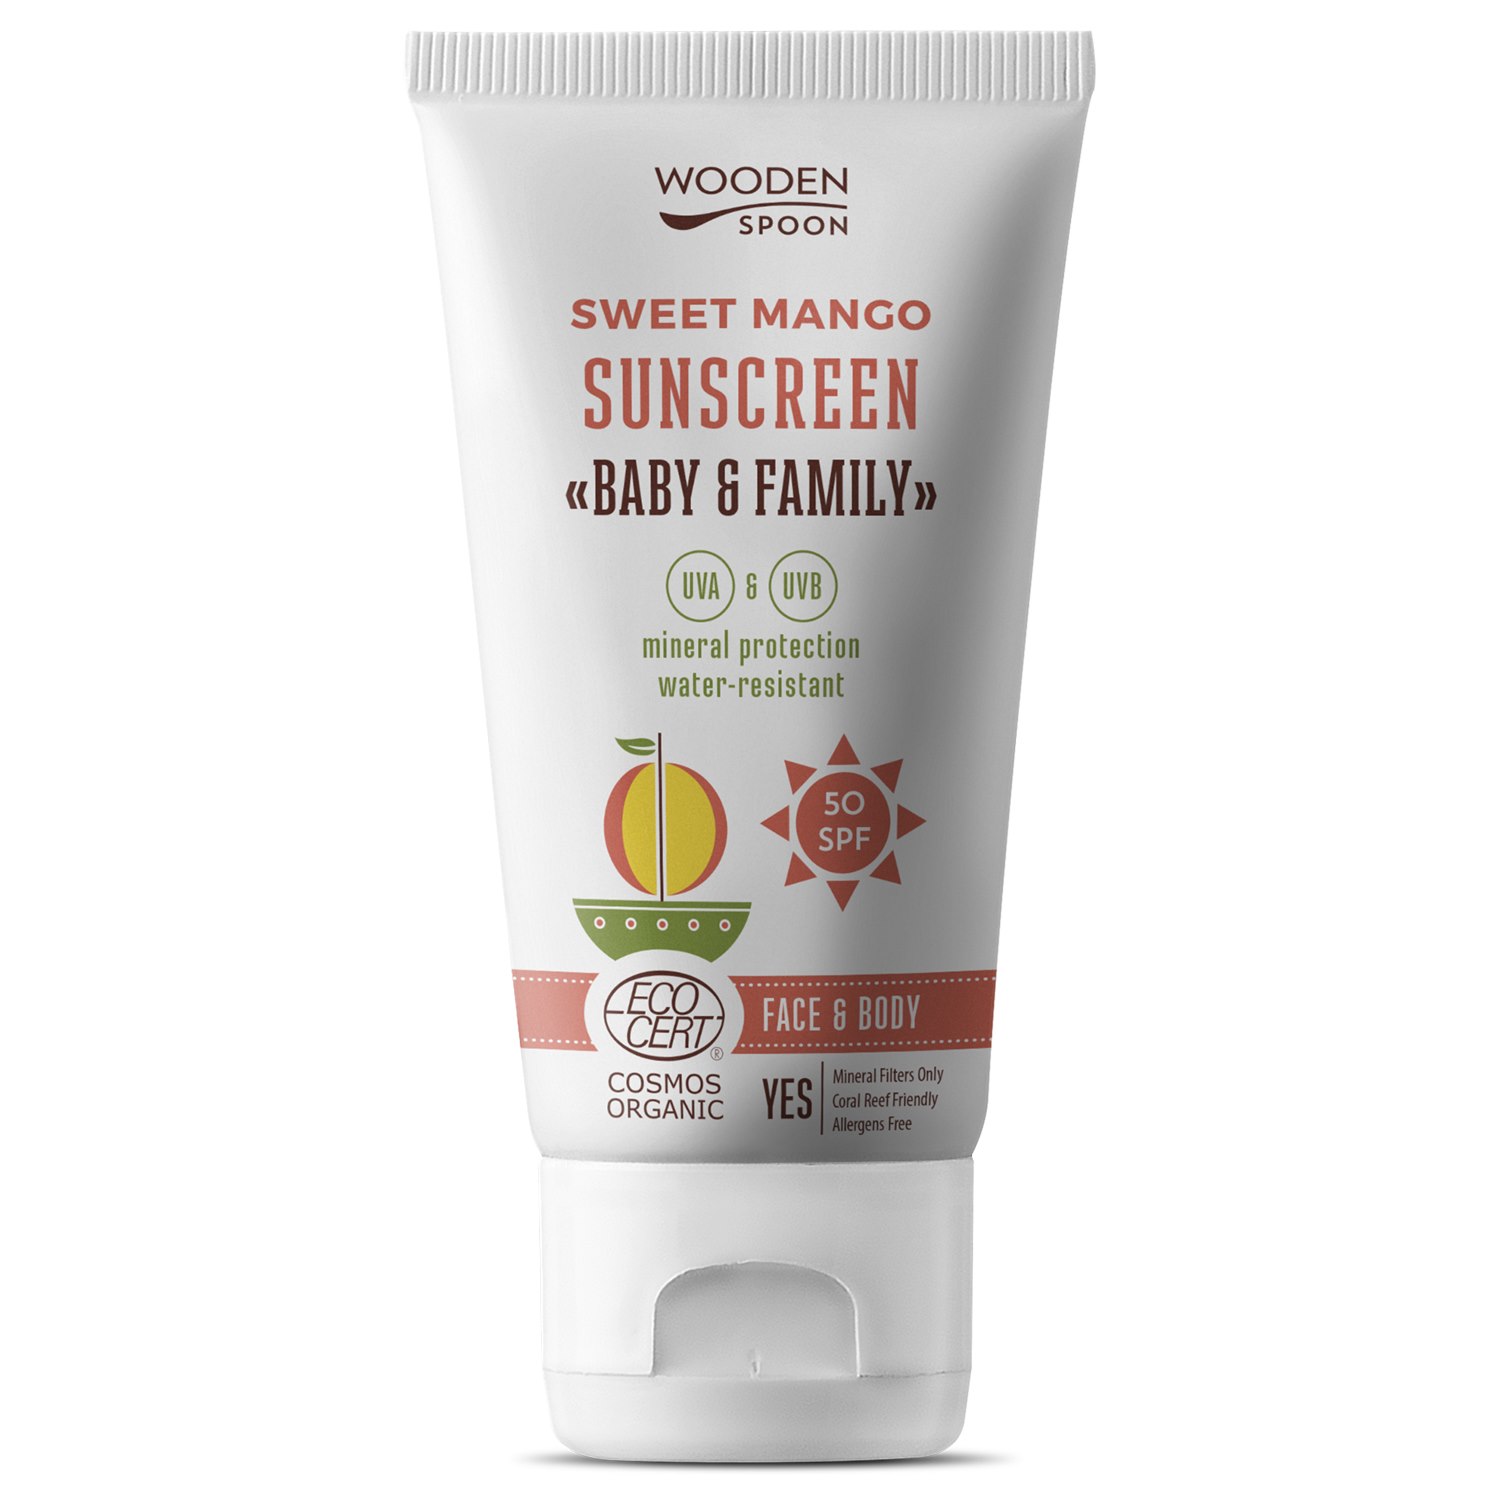 Wooden Spoon Sunscreen Lotion Baby & Family SPF 50 - Sweet Mango ...